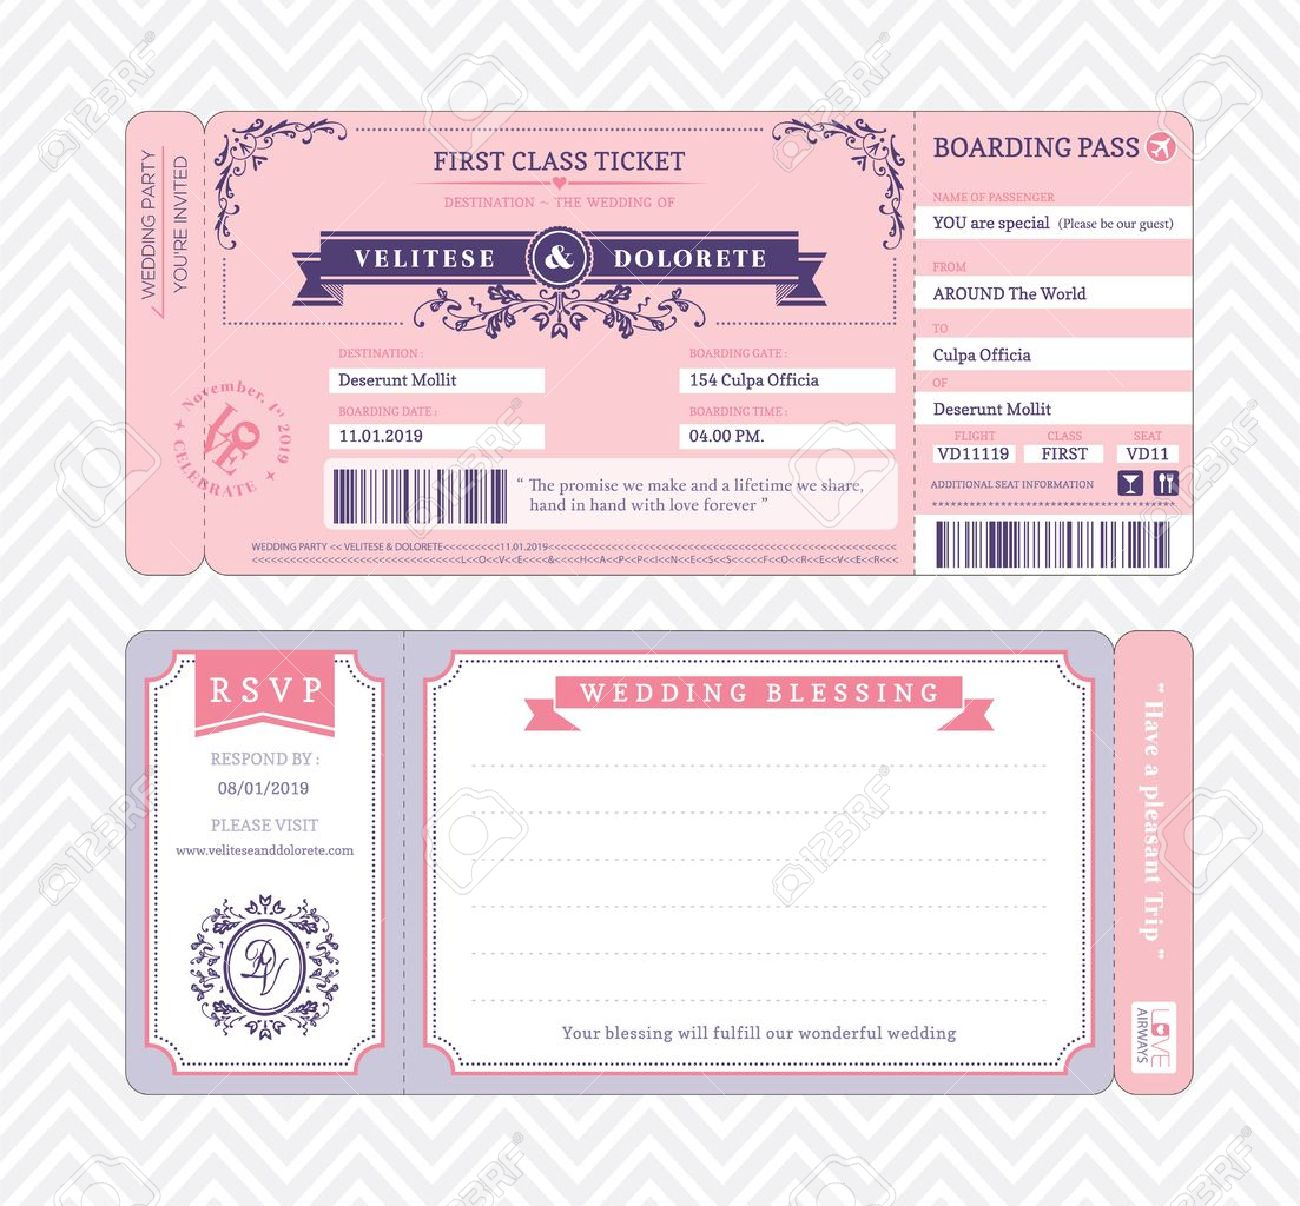 Boarding Pass Ticket Wedding Invitation Template Royalty Free inside dimensions 1300 X 1206